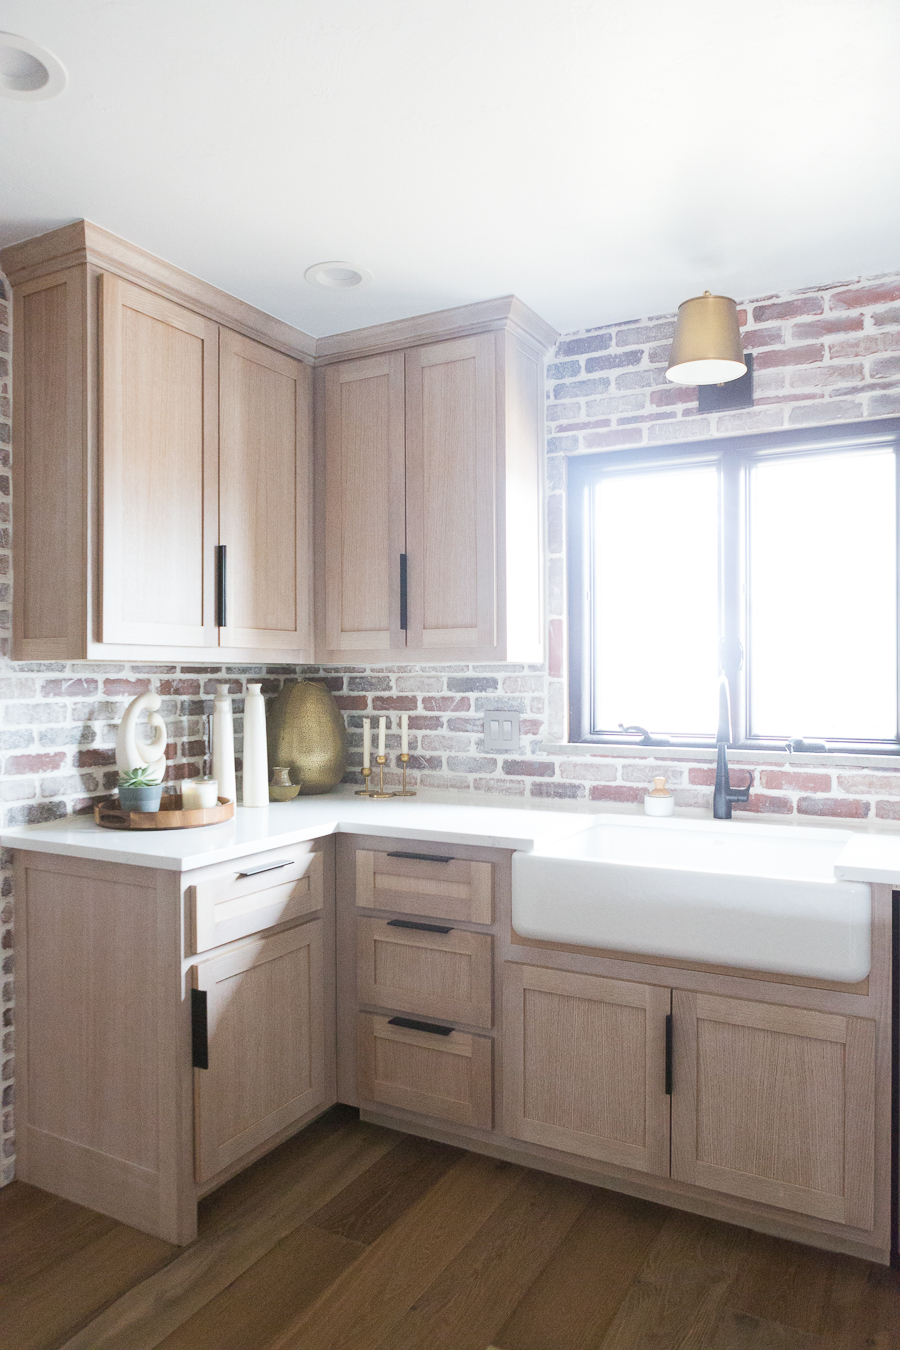 CC and Mike Kane Project Remodel Reveal brick kitchen bacskplash with a white farmhouse sink and black faucet rift sawn white oak cabinets with black hardware